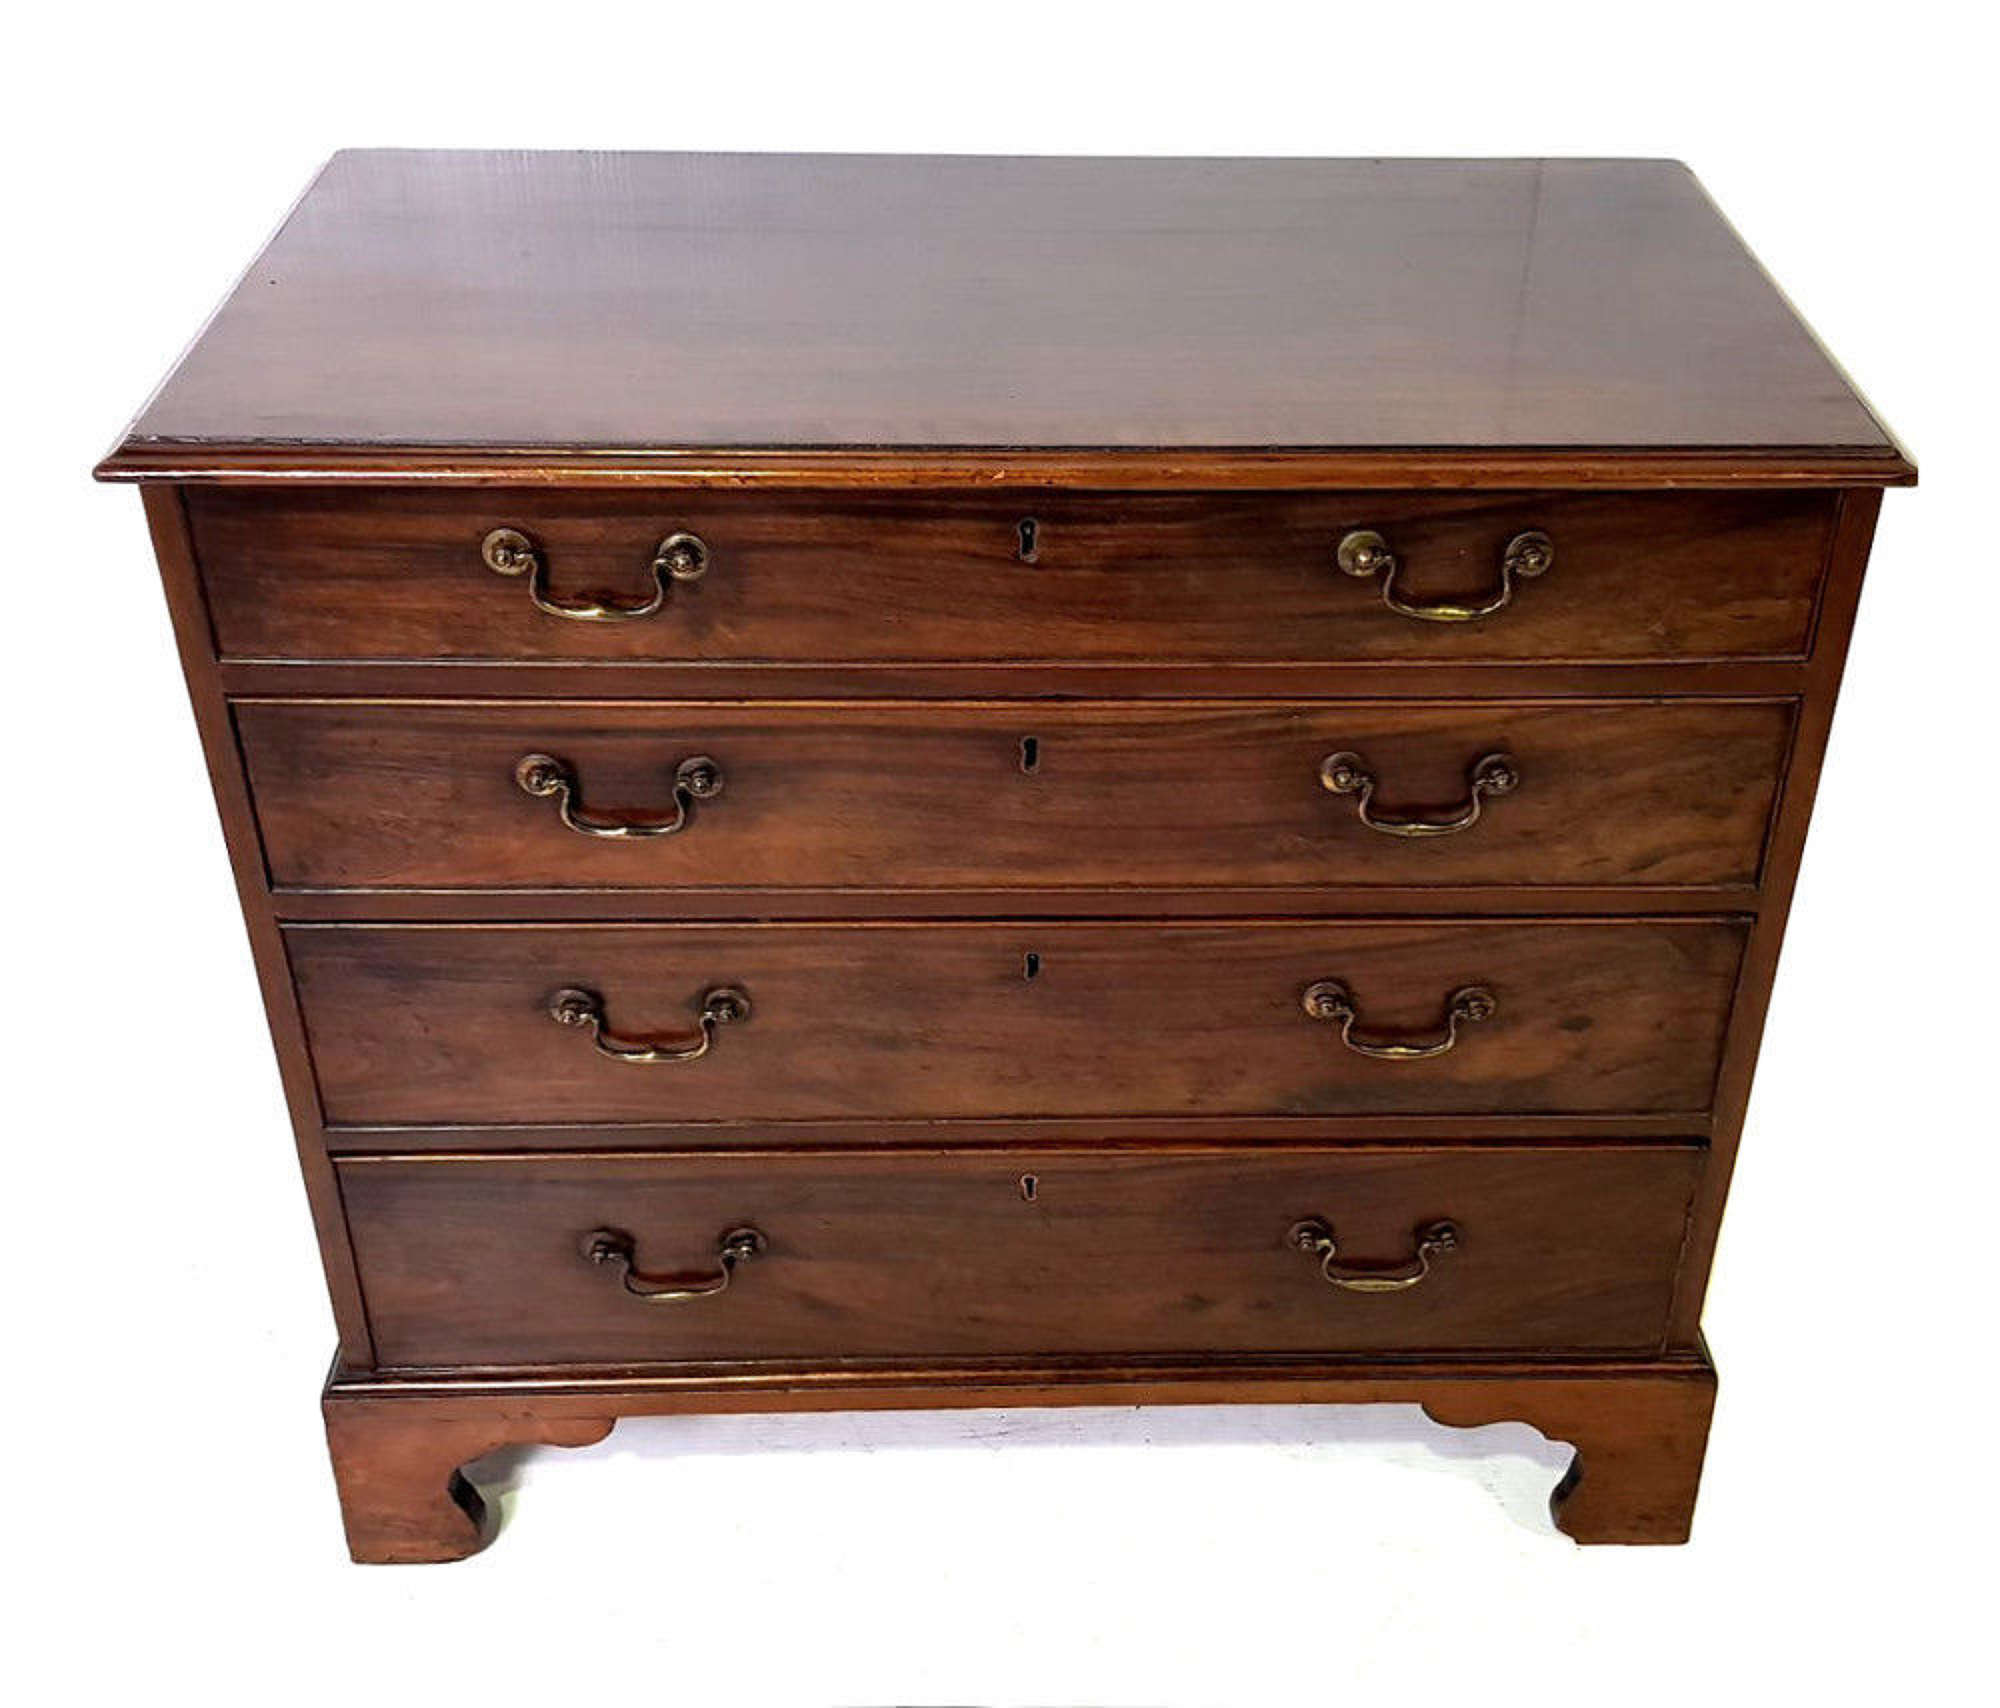 Good Quality 19th Century Mahogany Antique Chest Of Drawers